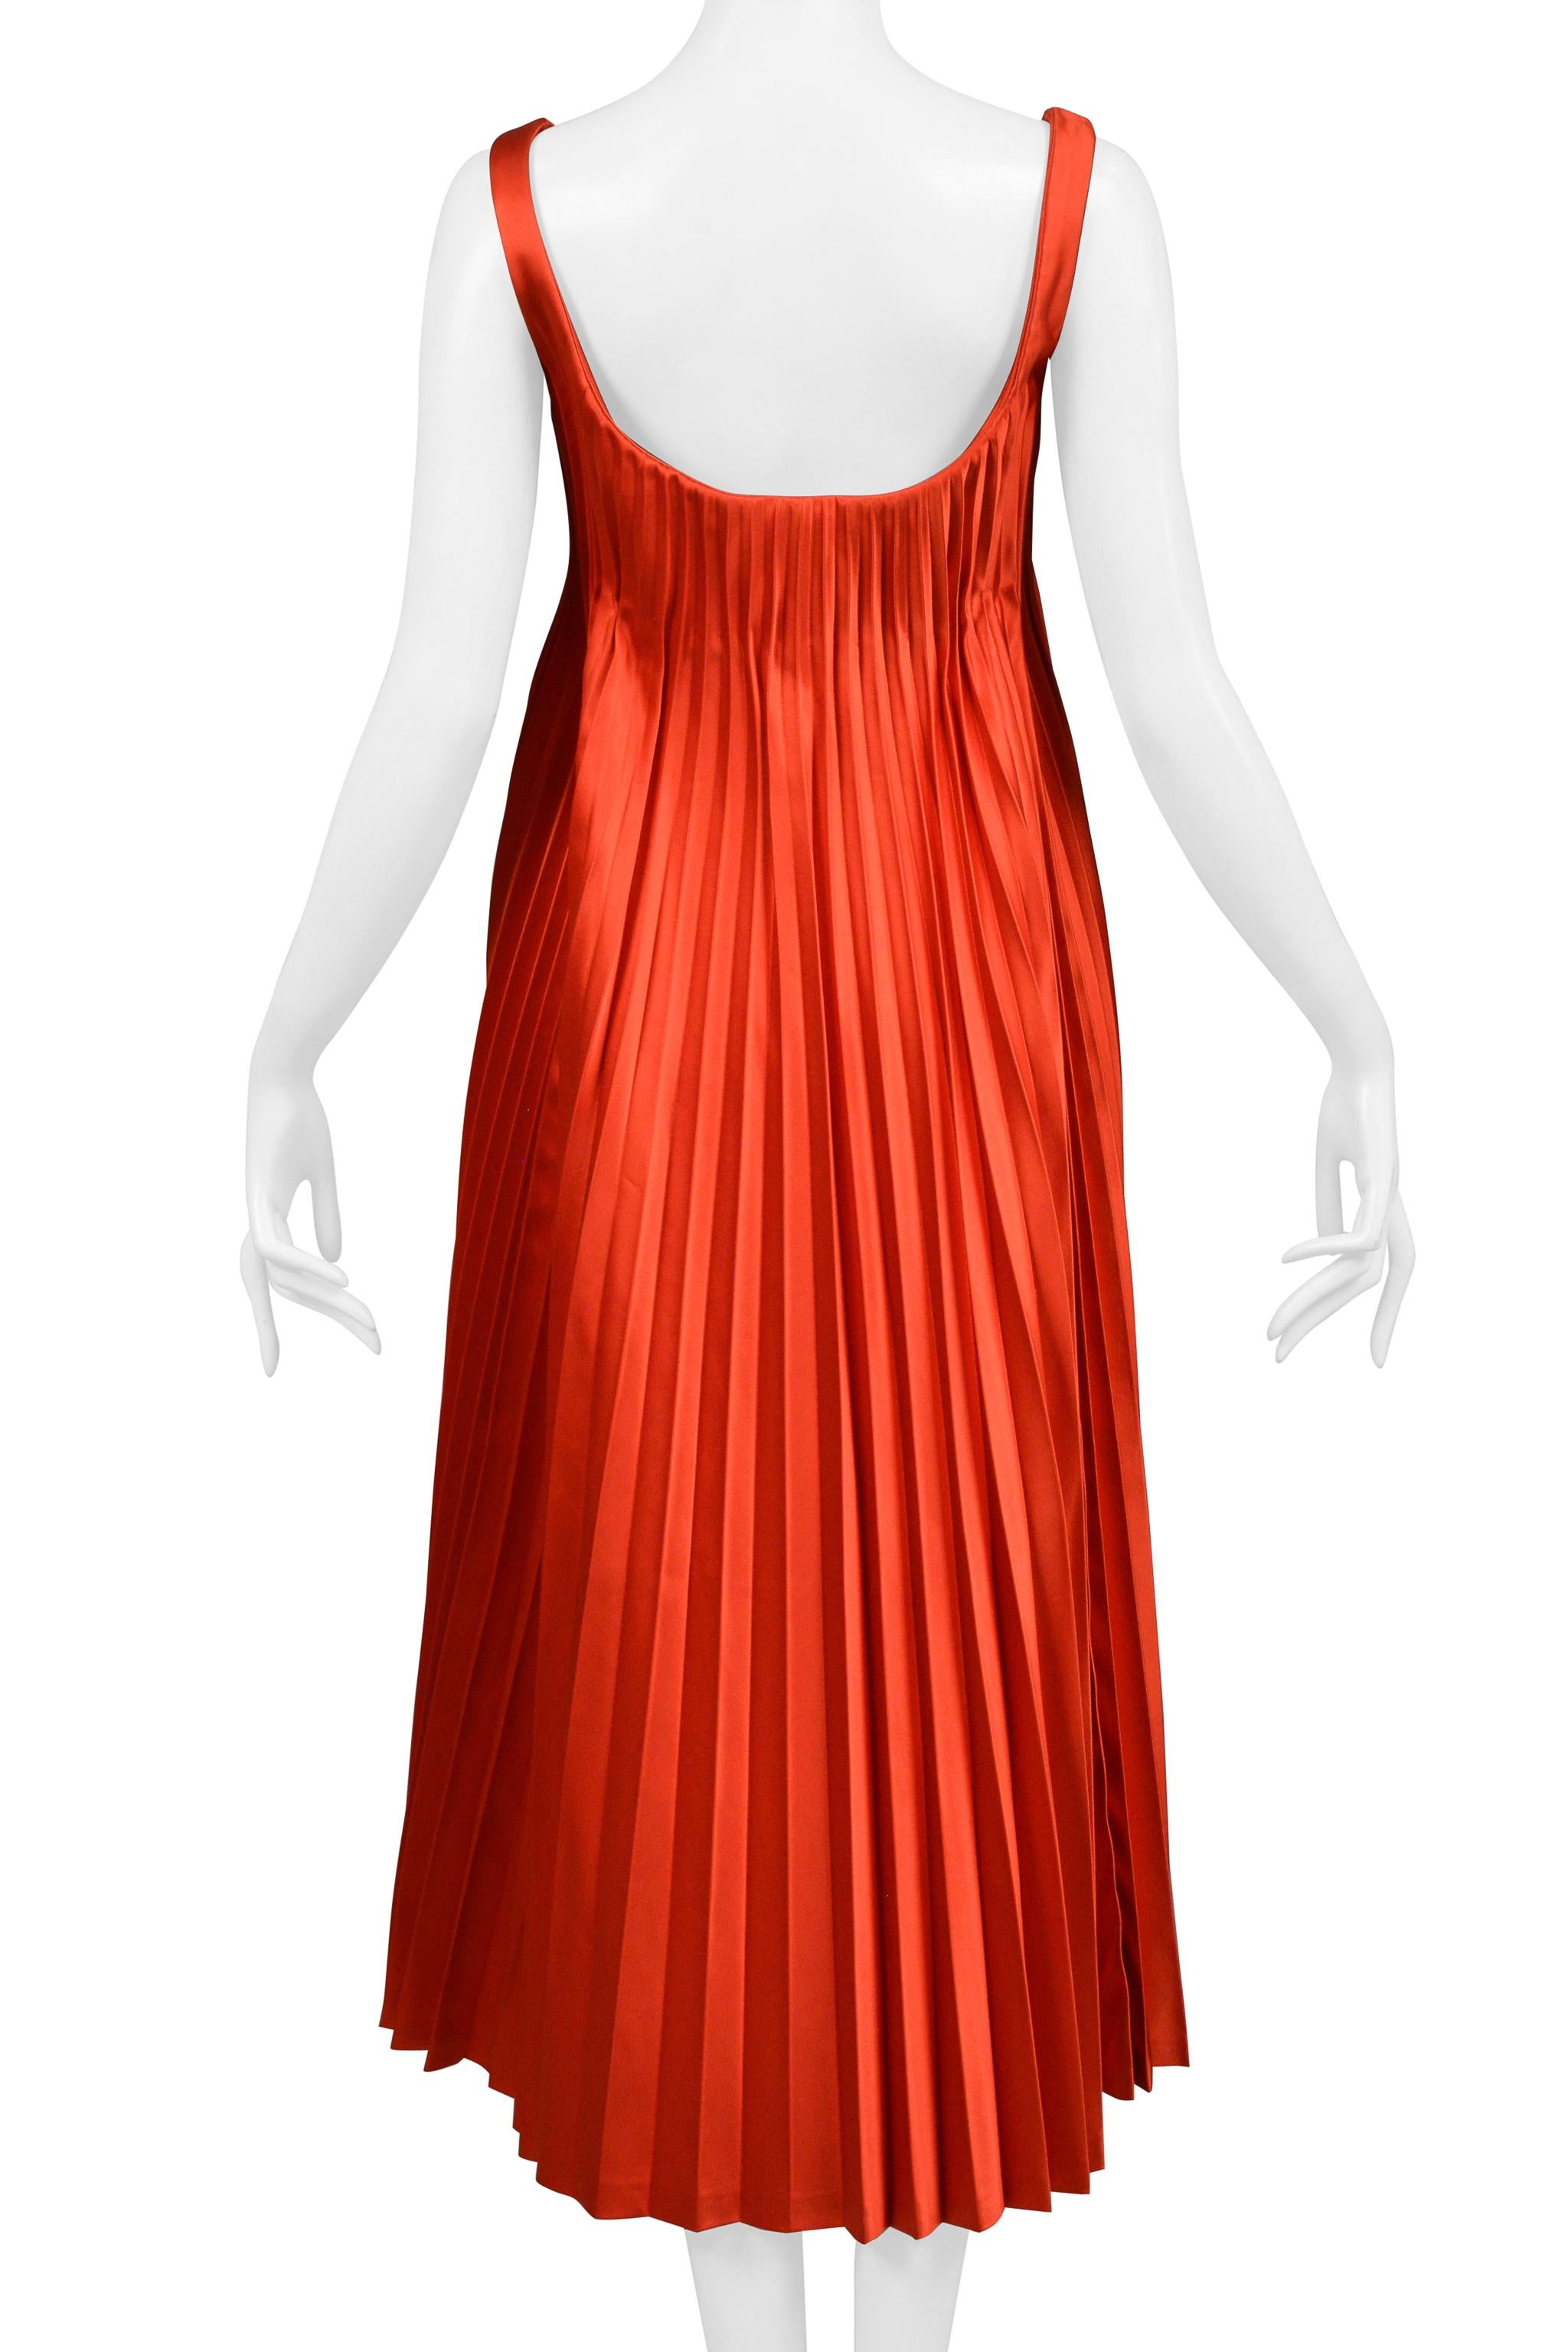 Women's Alexander McQueen Red Satin Pleated Cocktail Dress 2003 For Sale